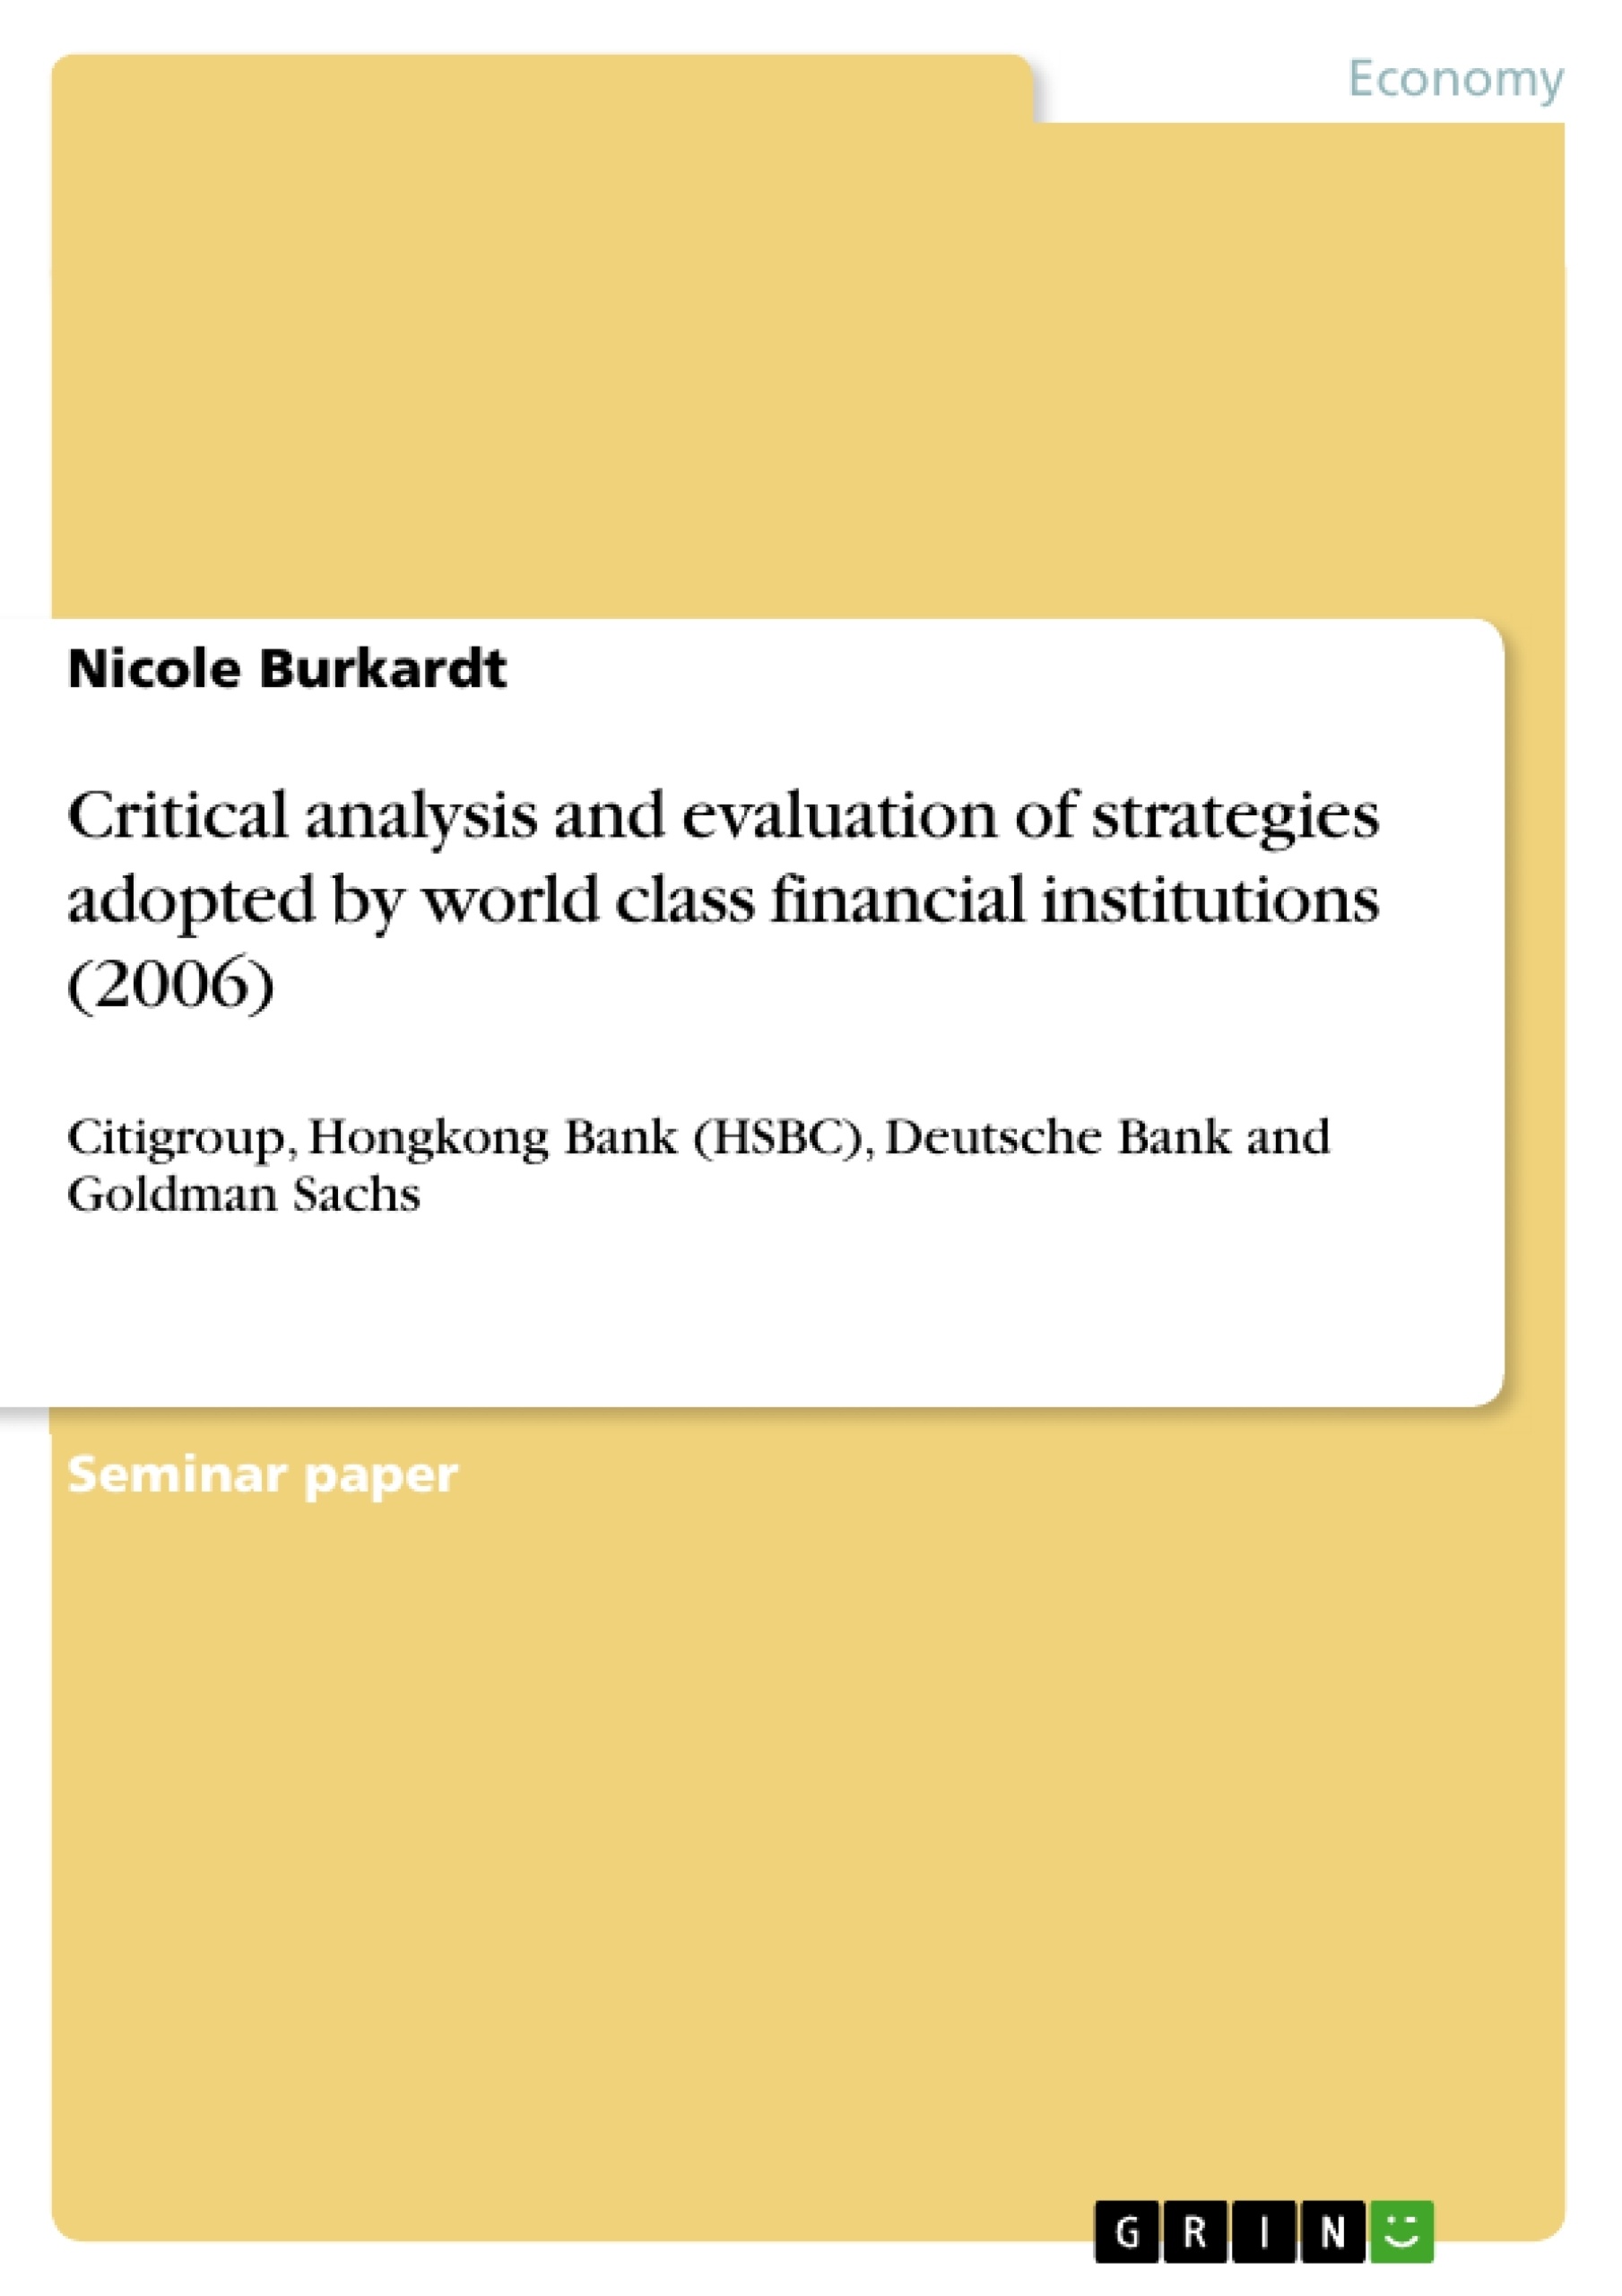 Title: Critical analysis and evaluation of strategies adopted by world class financial institutions (2006)